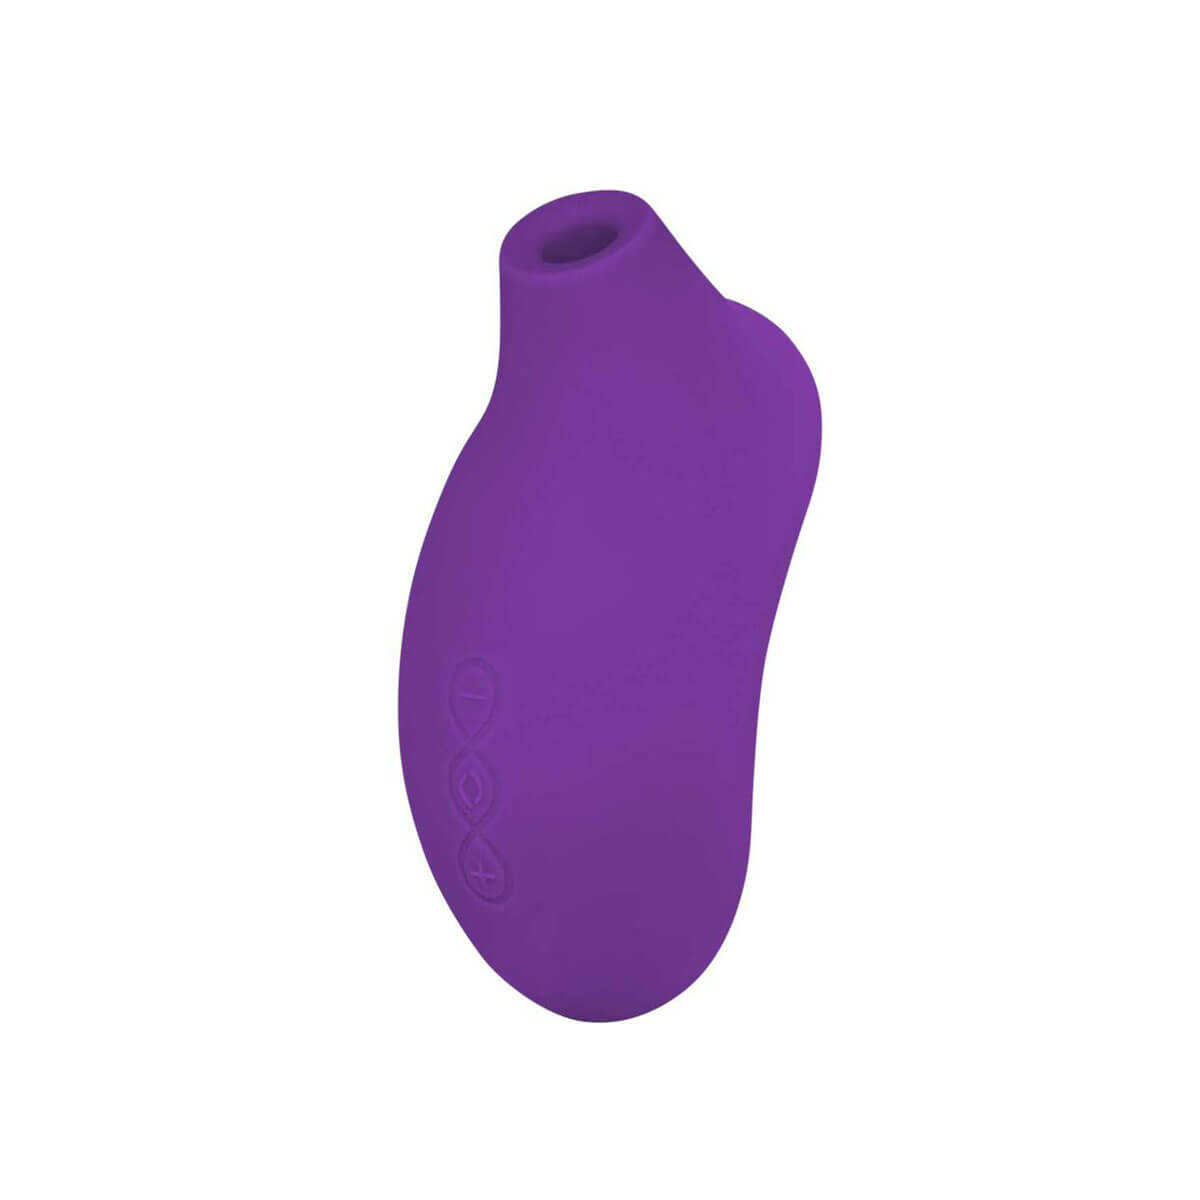 Lelo Sona purple silicone clitoral massager with round nozzle Nudie Co